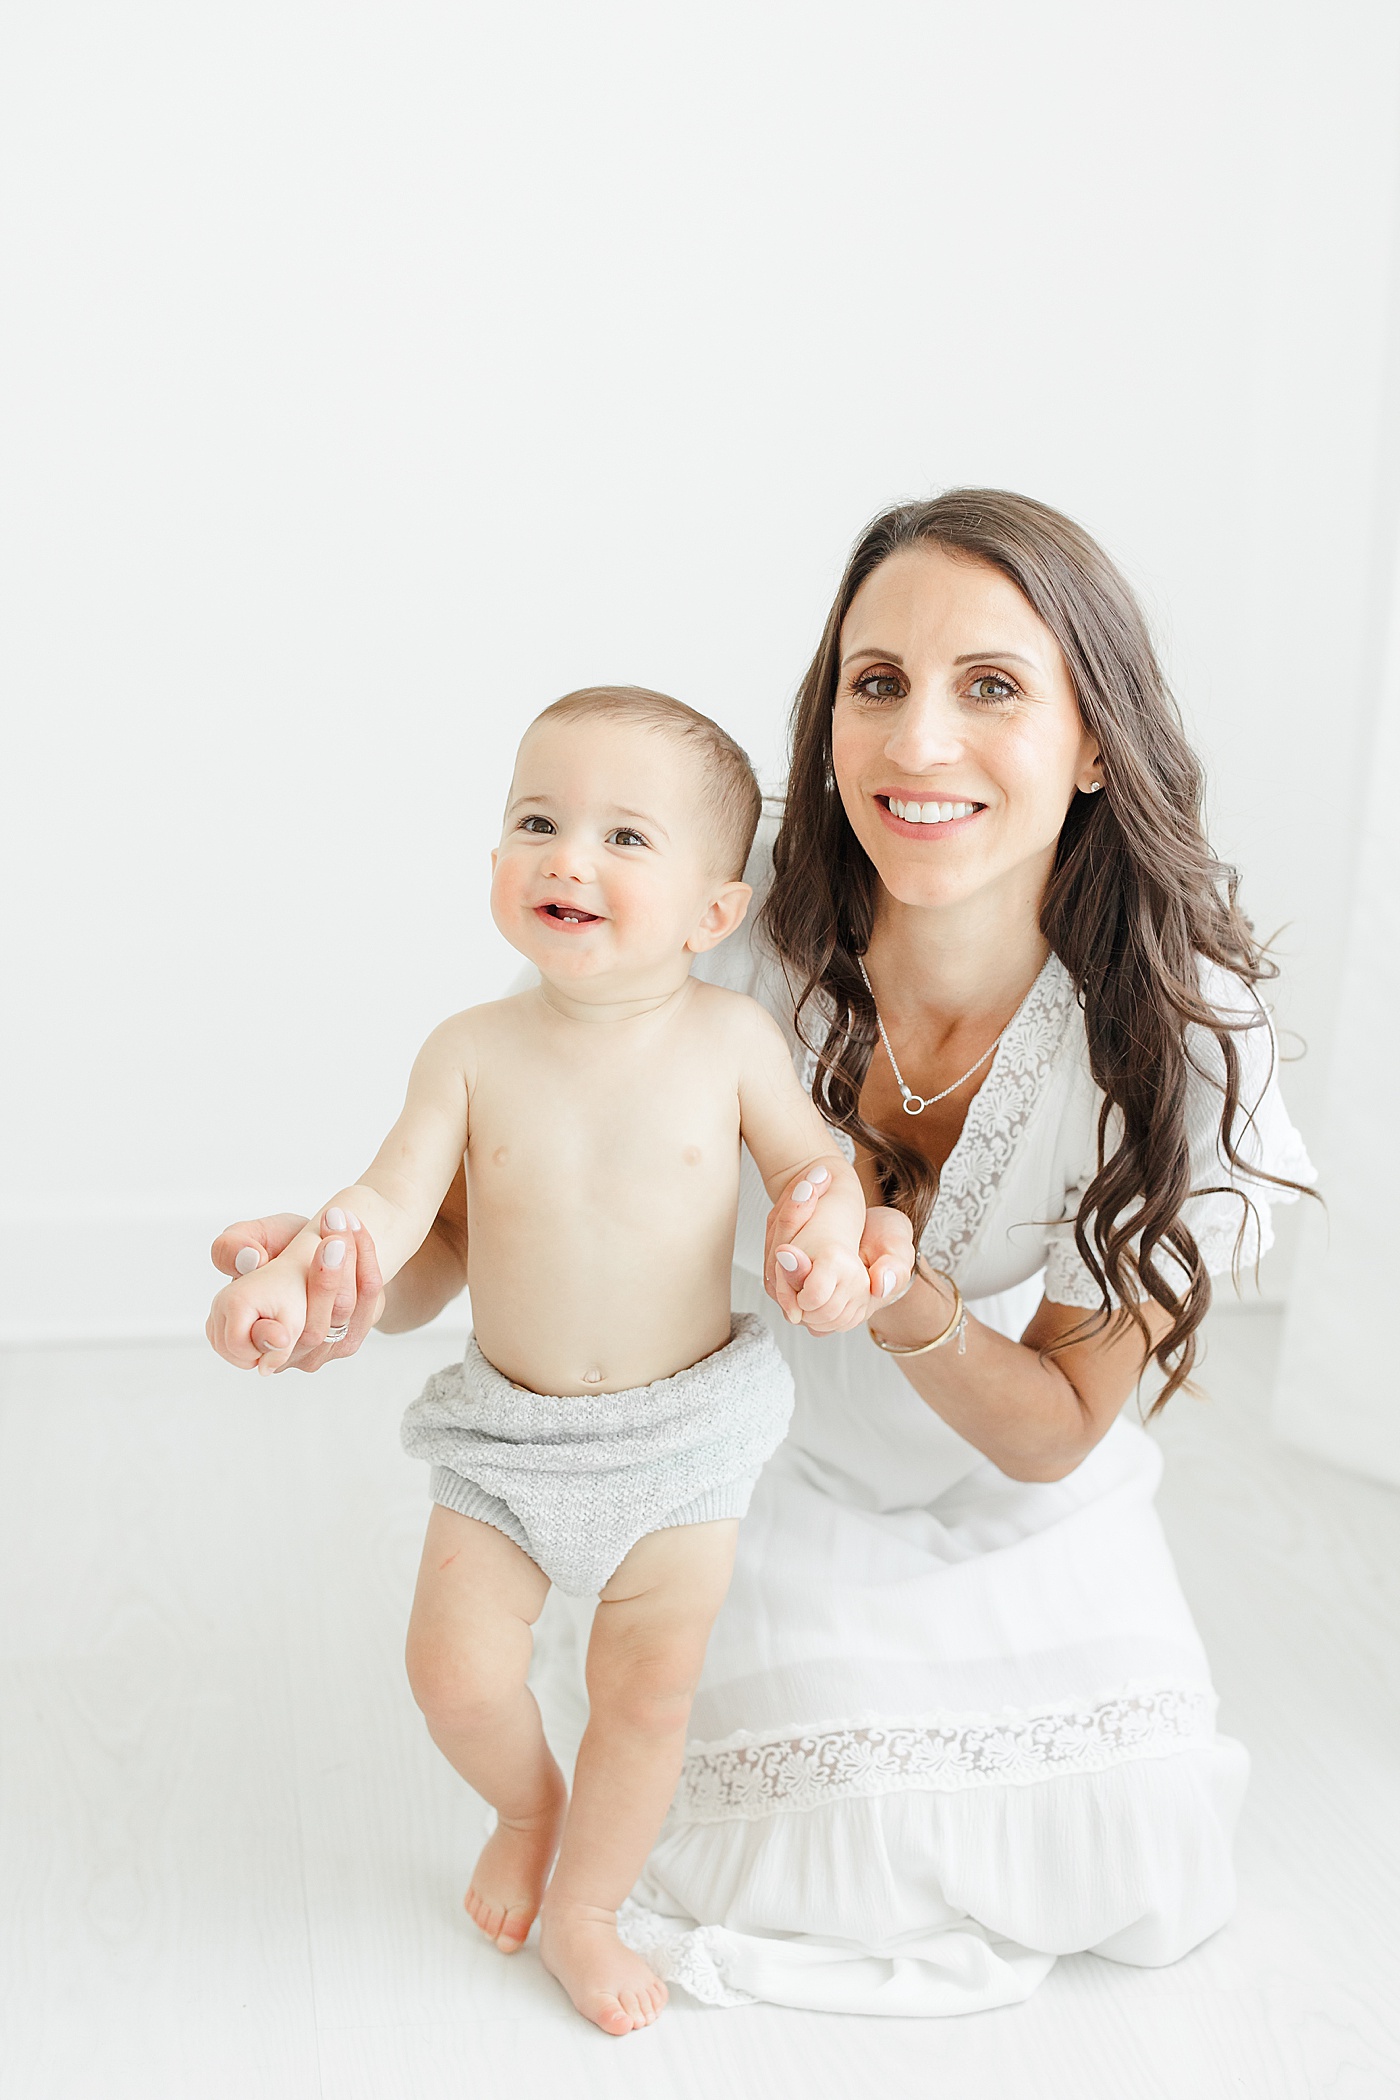 Mom and one year old son during photoshoot with Kristin Wood Photography to celebrate his first birthday.